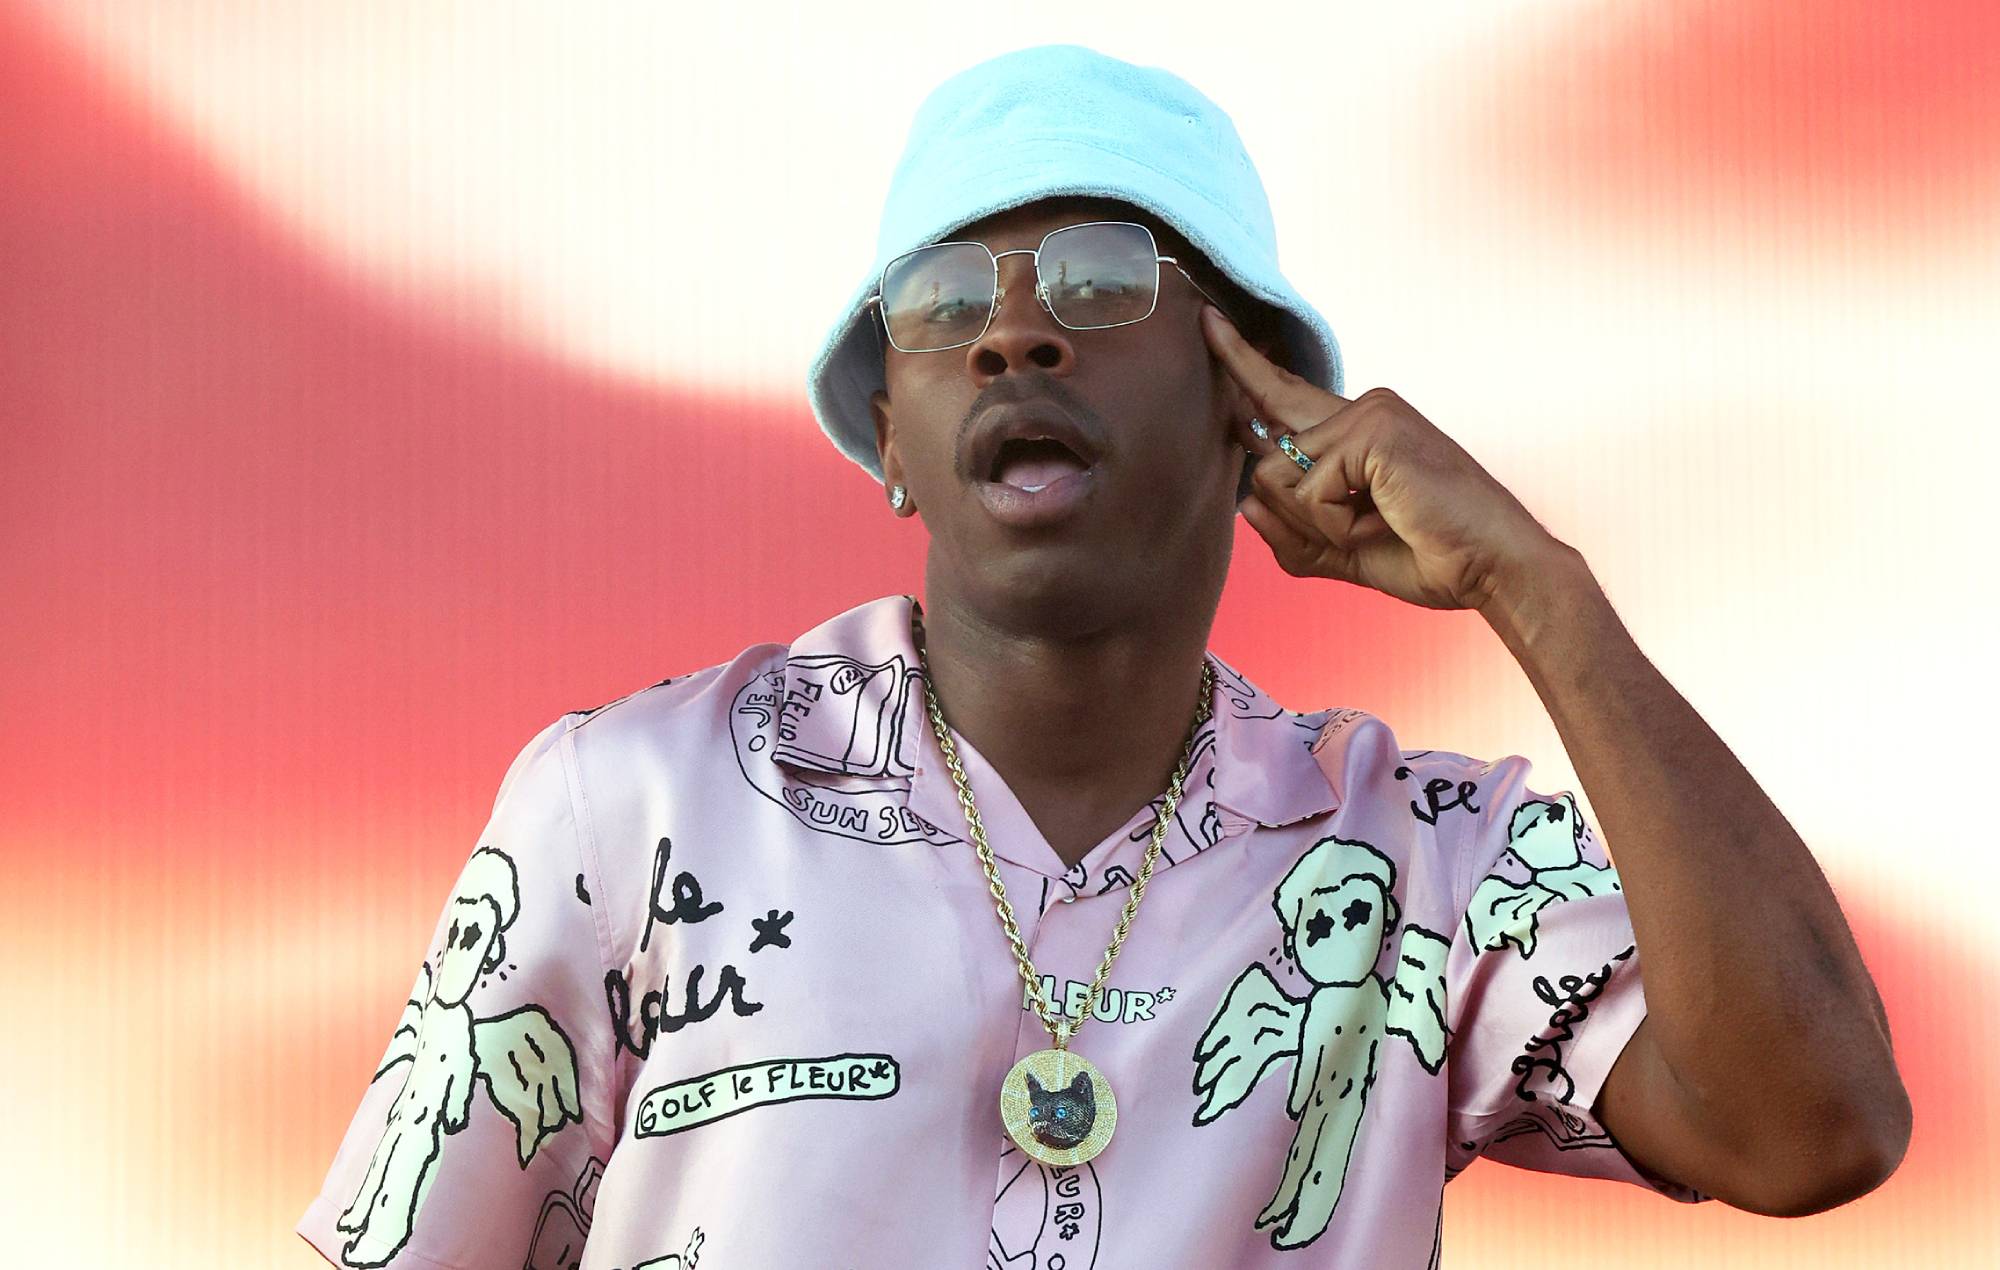 SZA, Clipse and more to play Tyler, the Creator's Camp Flog Gnaw